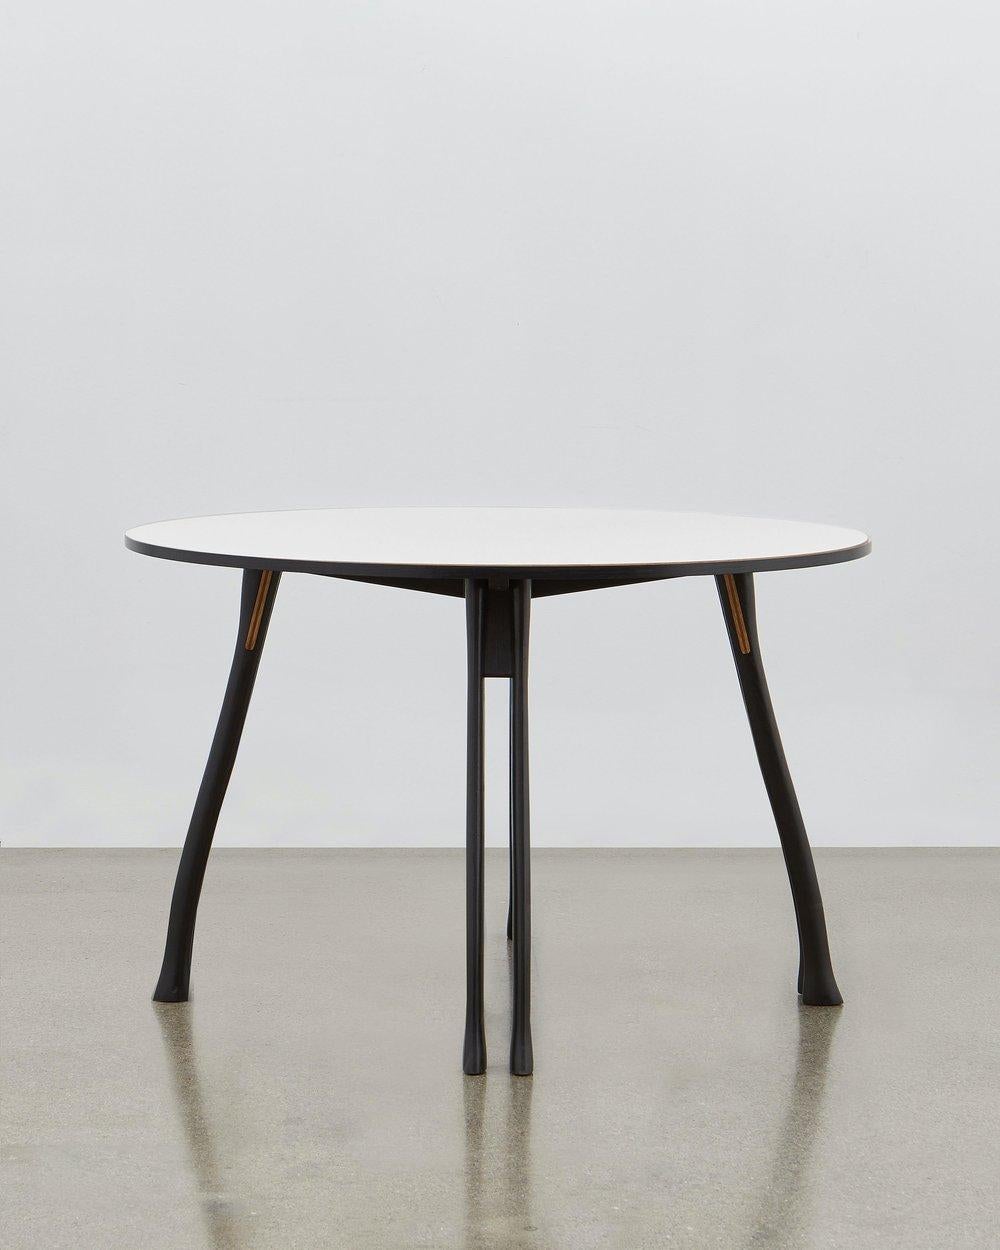 Inspired by the humble axe handle, Poul Henningsen has utilized this familiar and tactile shape to provide the basis for the legs of the versatile table.

This piece of furniture stays true to the fundamental values that drove its designer: it is